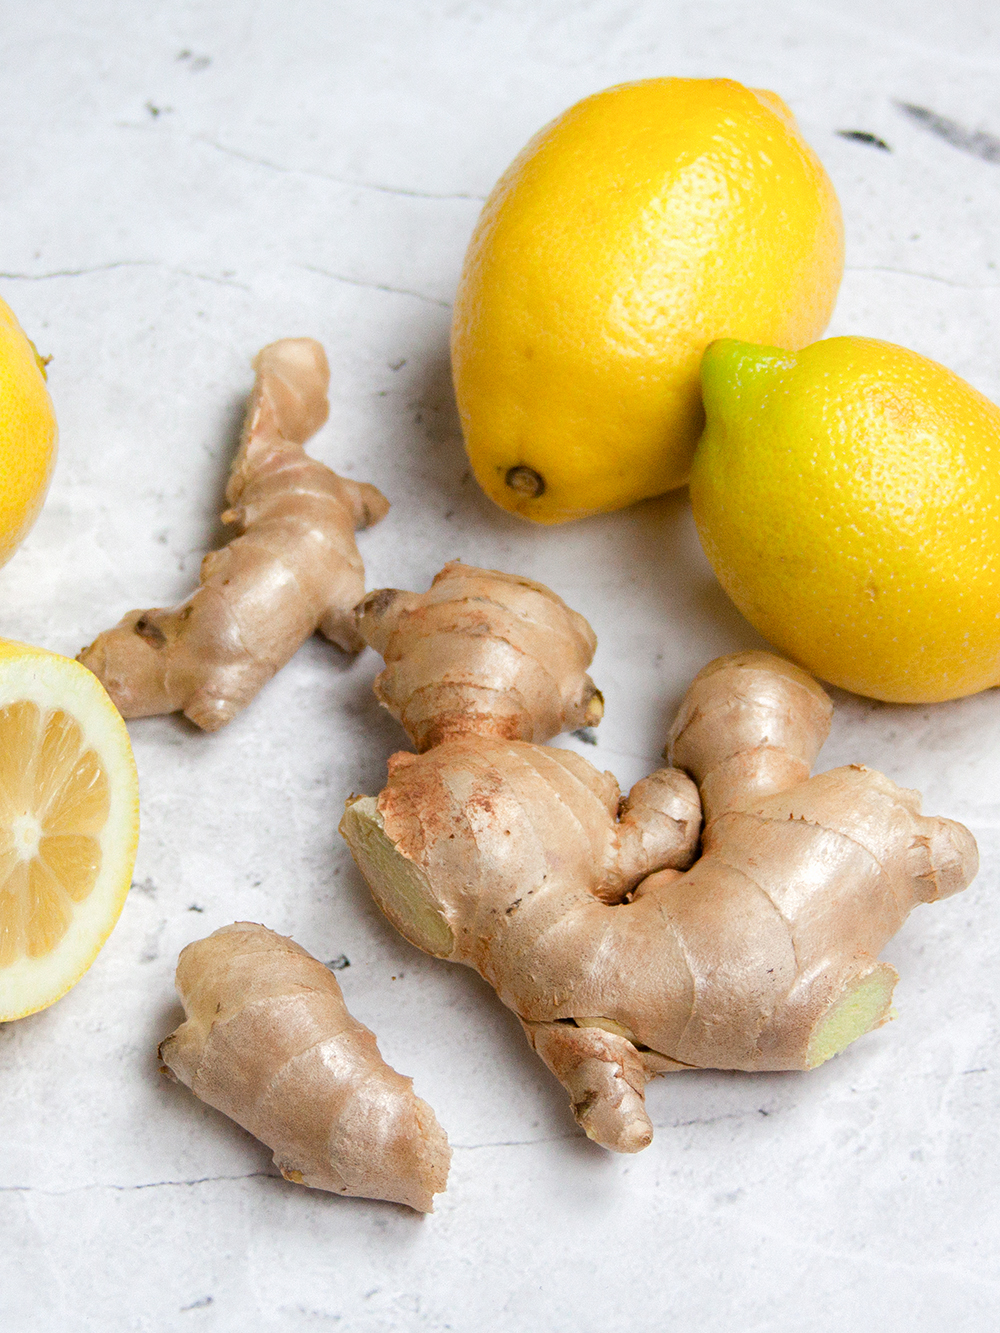 13 Benefits of Ginger, According to Experts